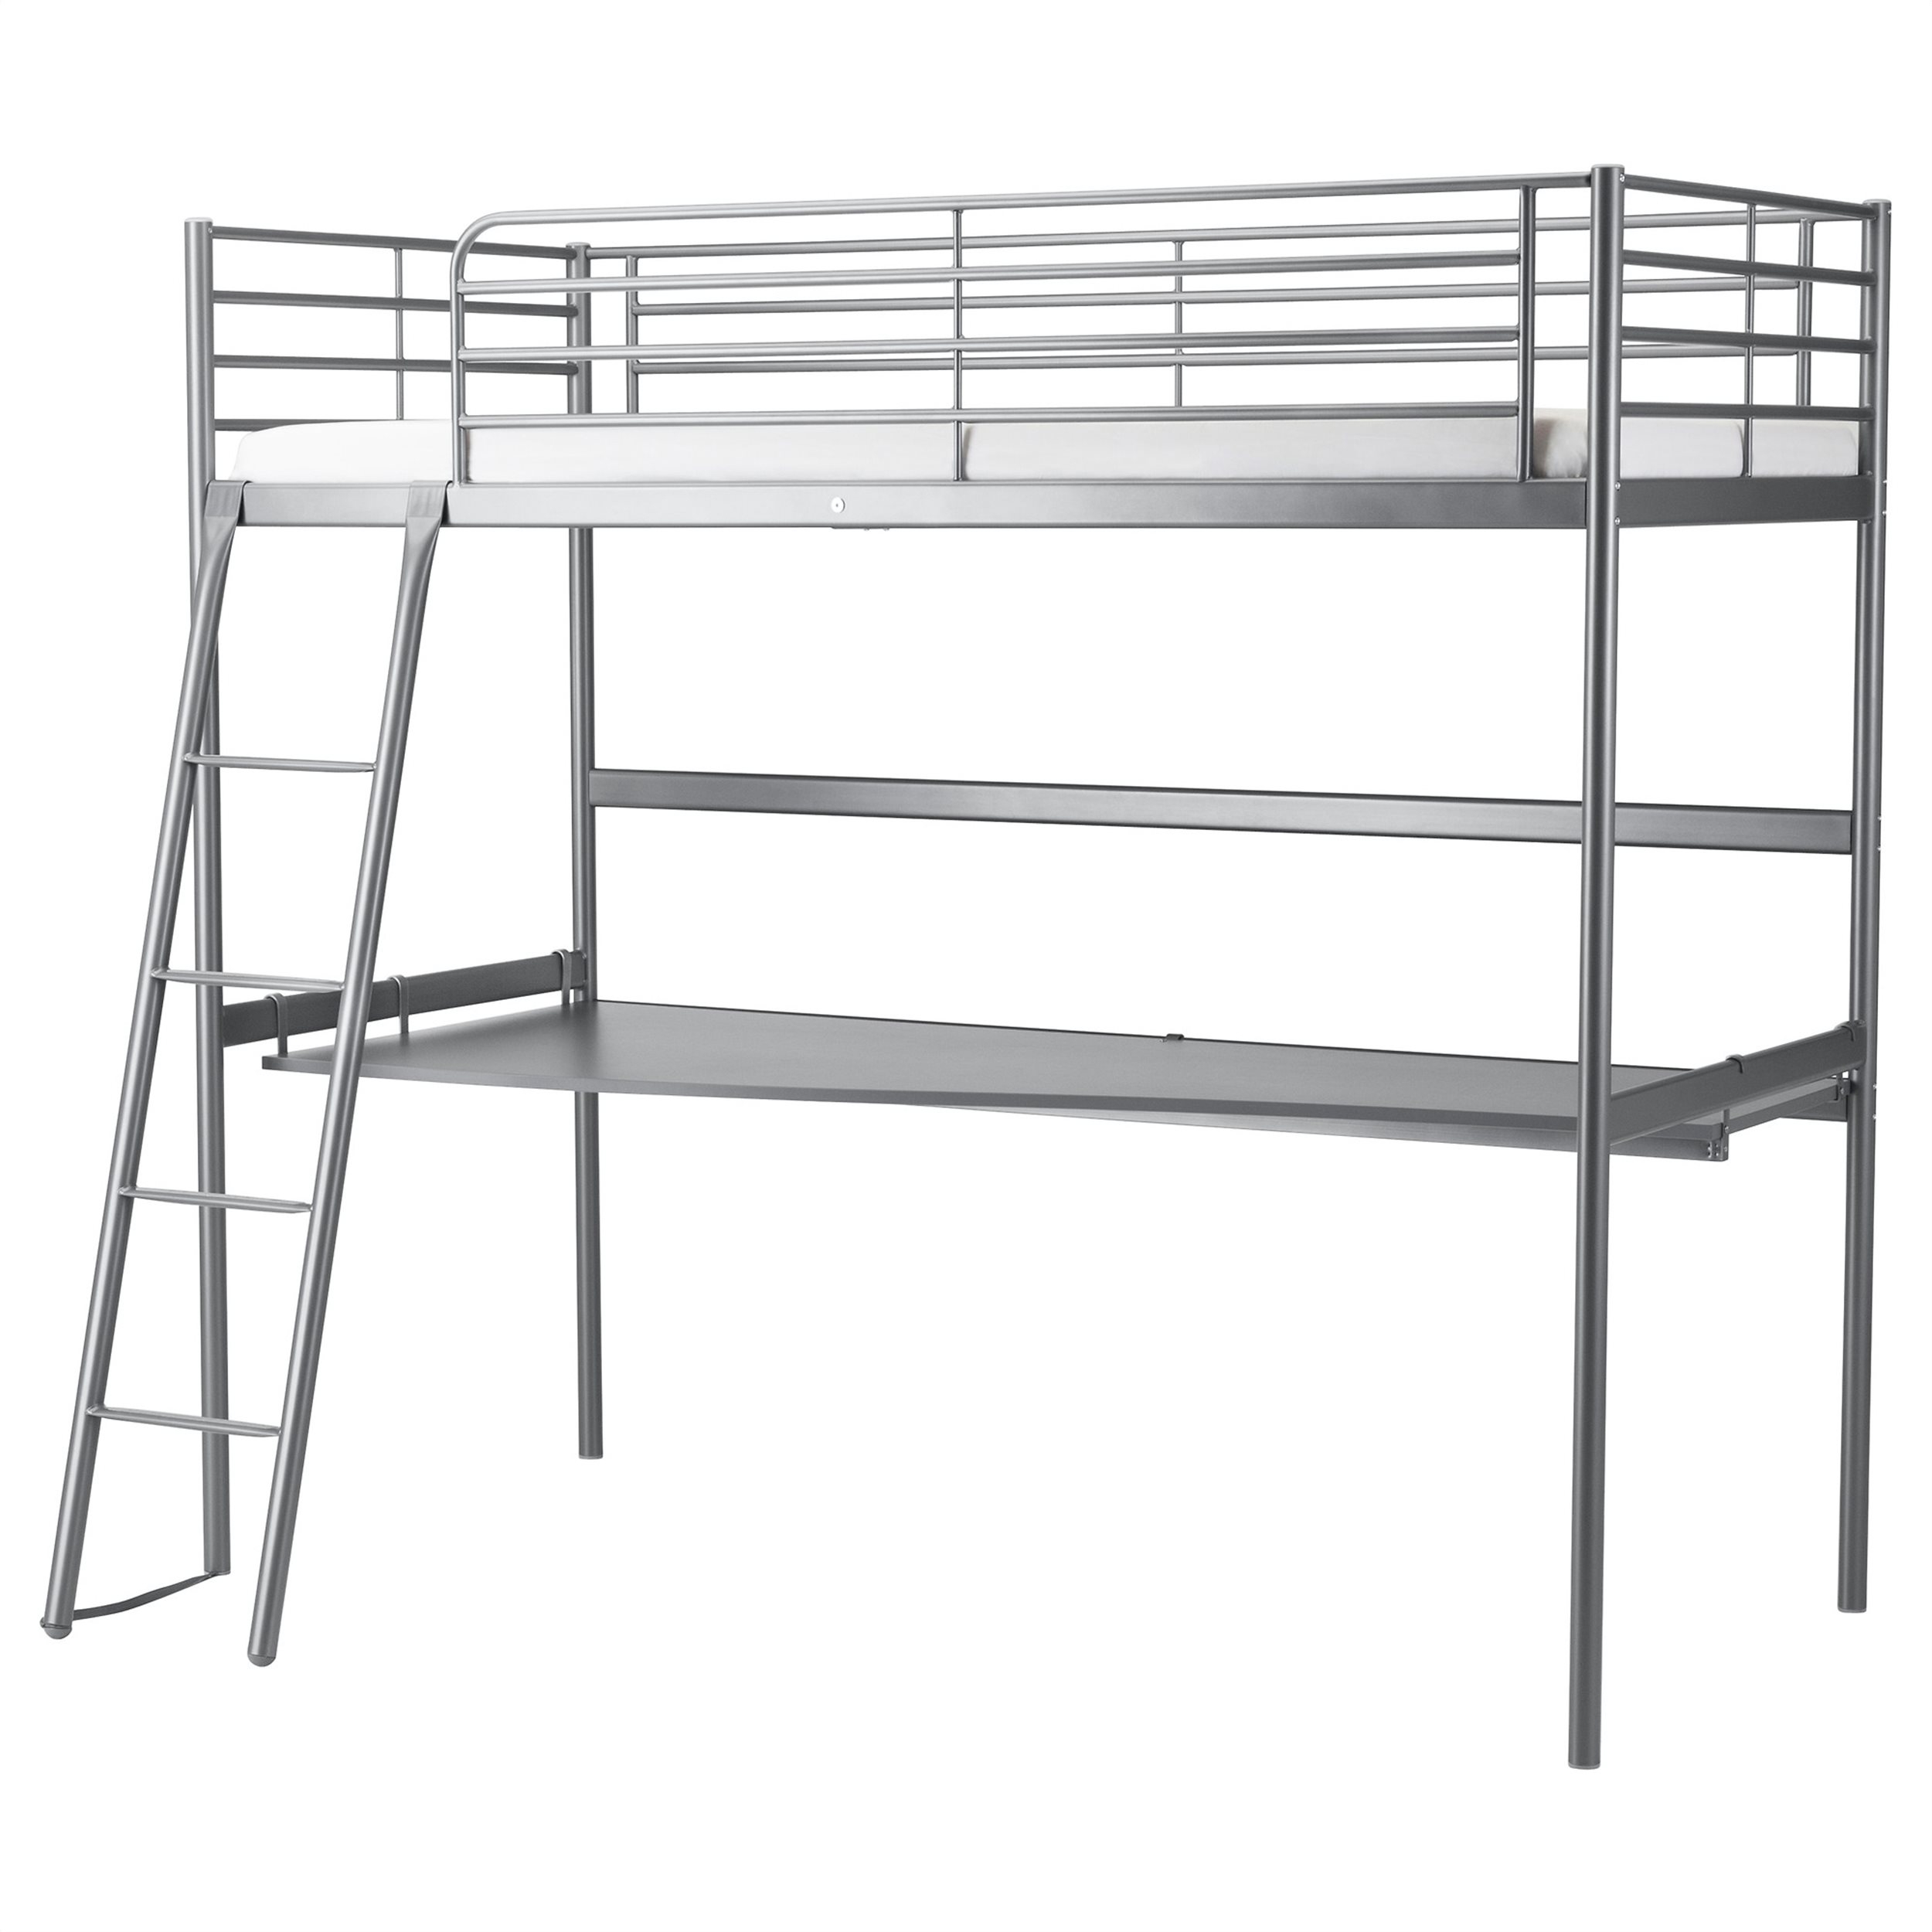 Bunk Bed With Desk Underneath Ikea, Single Bunk Bed With Desk